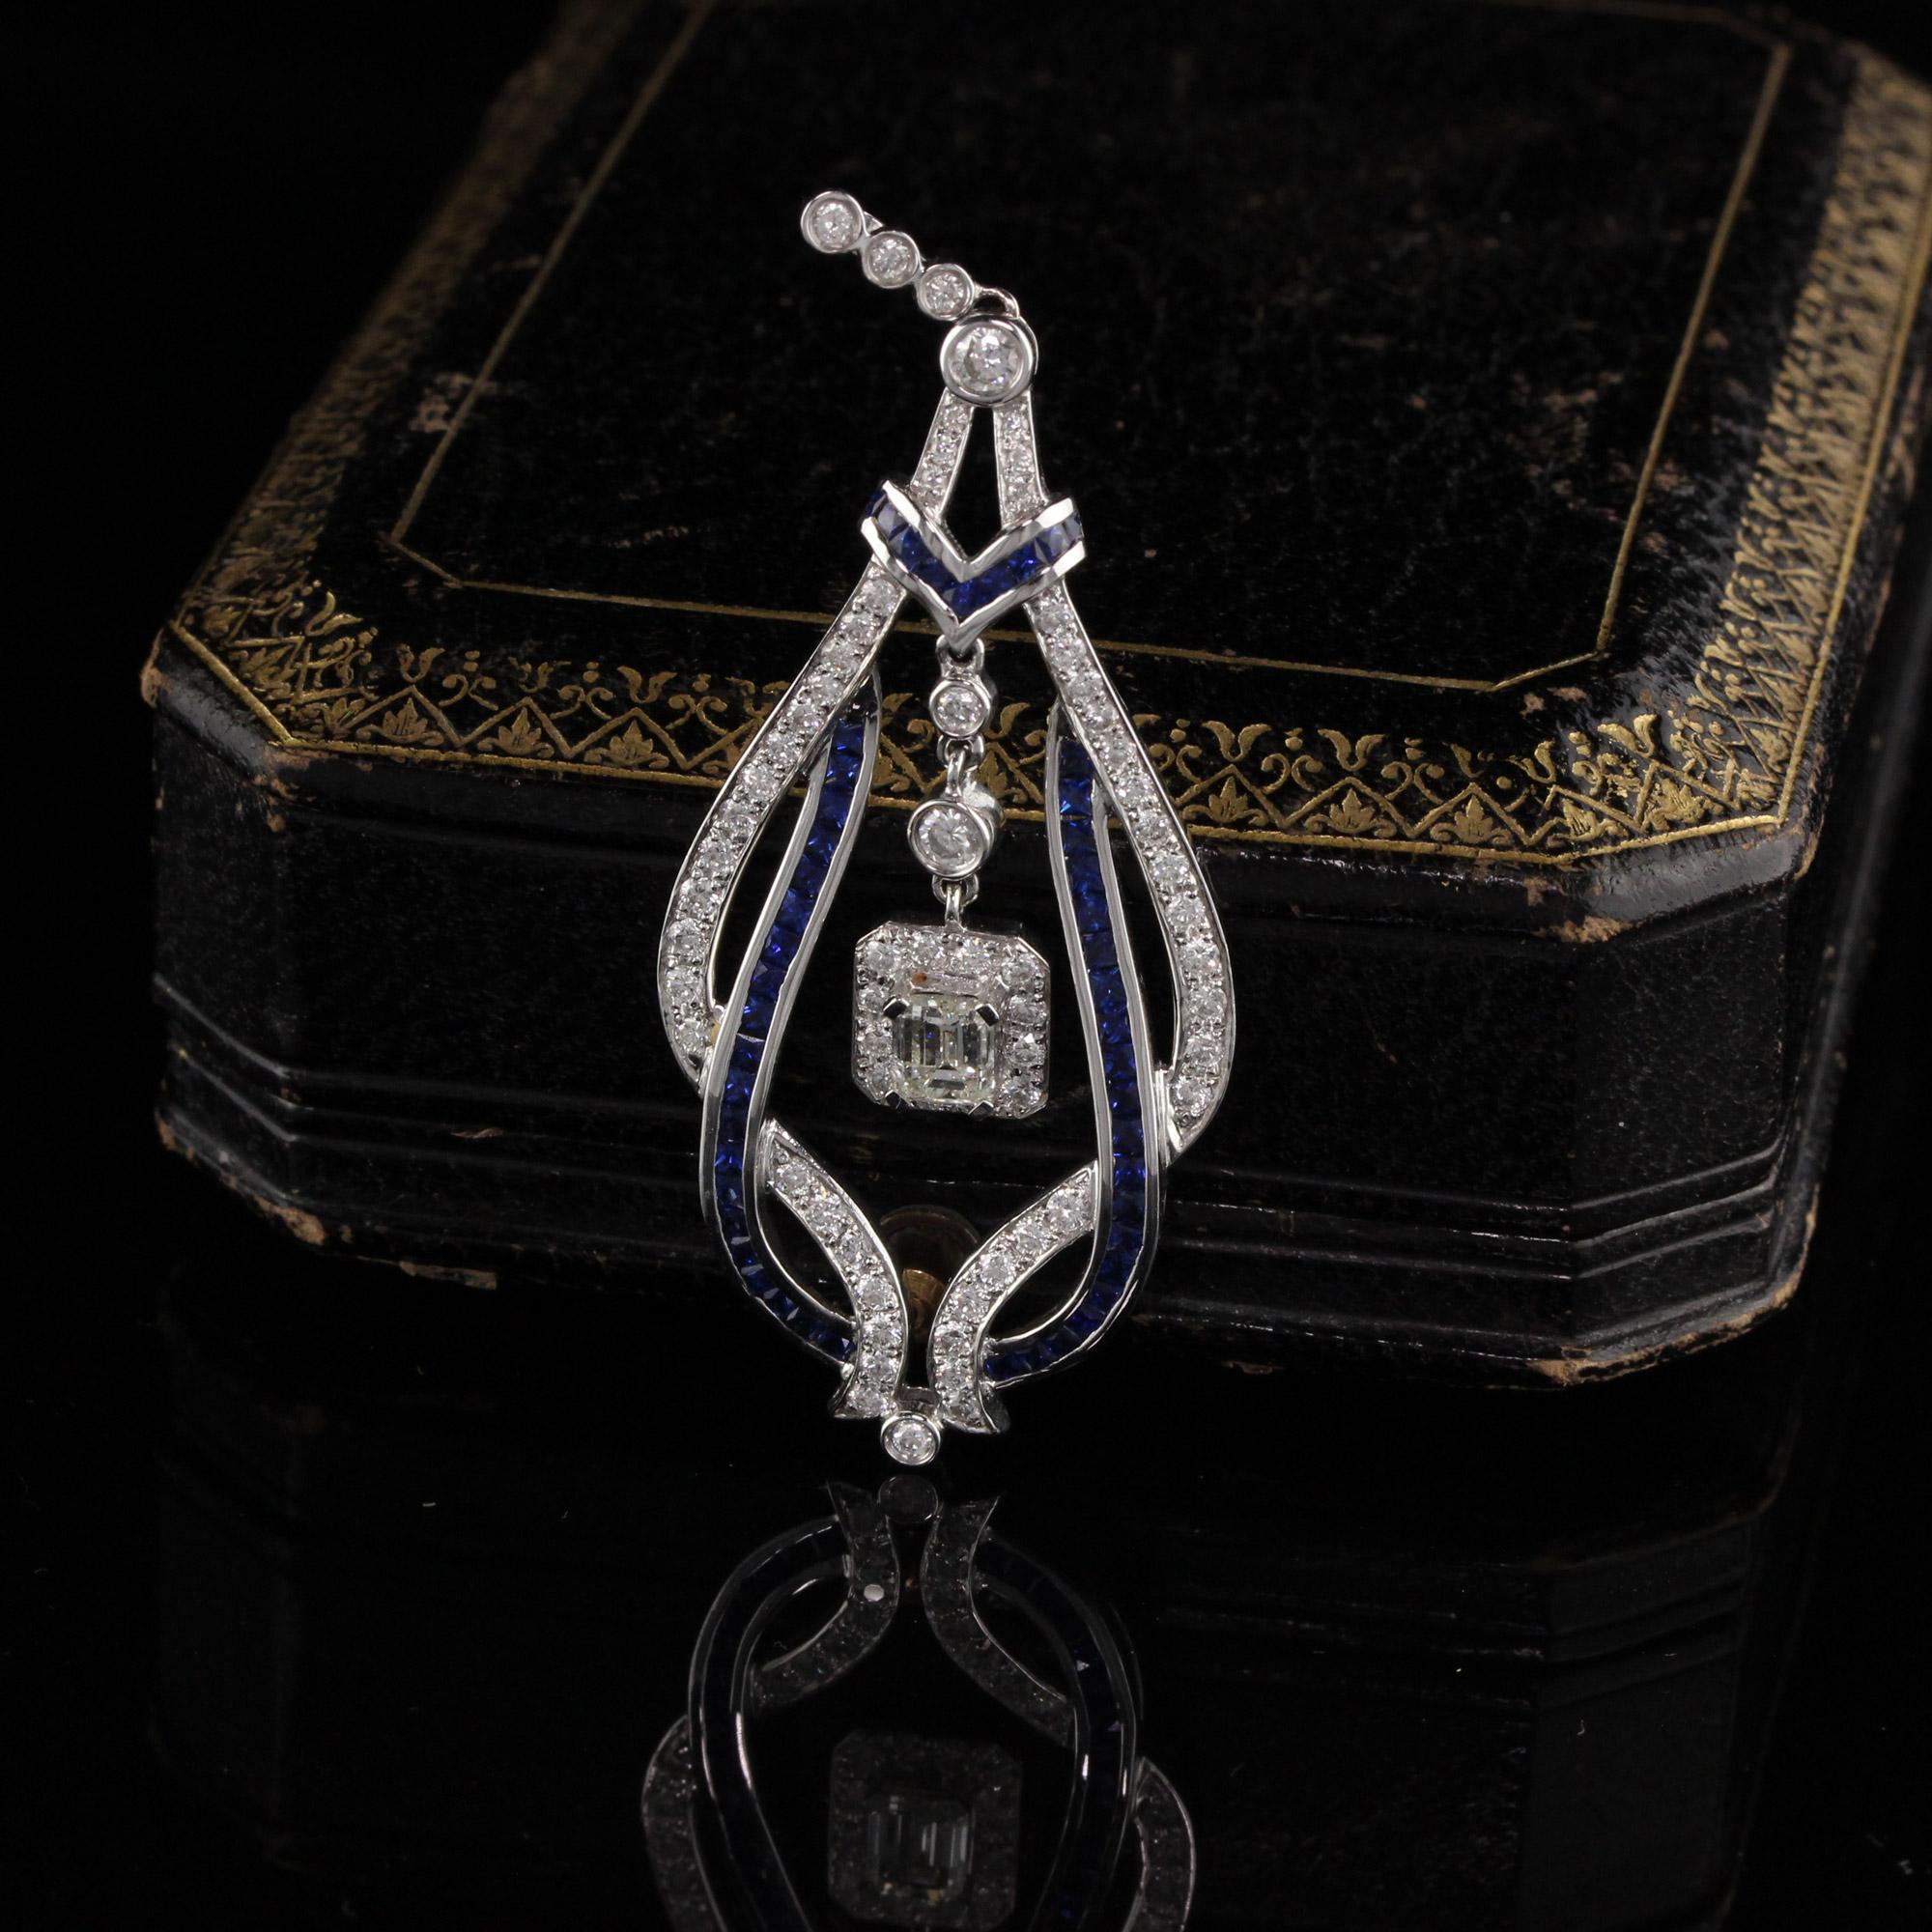 Gorgeous sapphire and diamond pendant with dazzling diamond center.

Metal: 18K White Gold

Weight: 10.5 Grams

Diamond Weight: Approximately 1.50 ct.

Diamond Color: H

Diamond Clarity: SI1

Gemstone Weight: Approximately 1 ct.